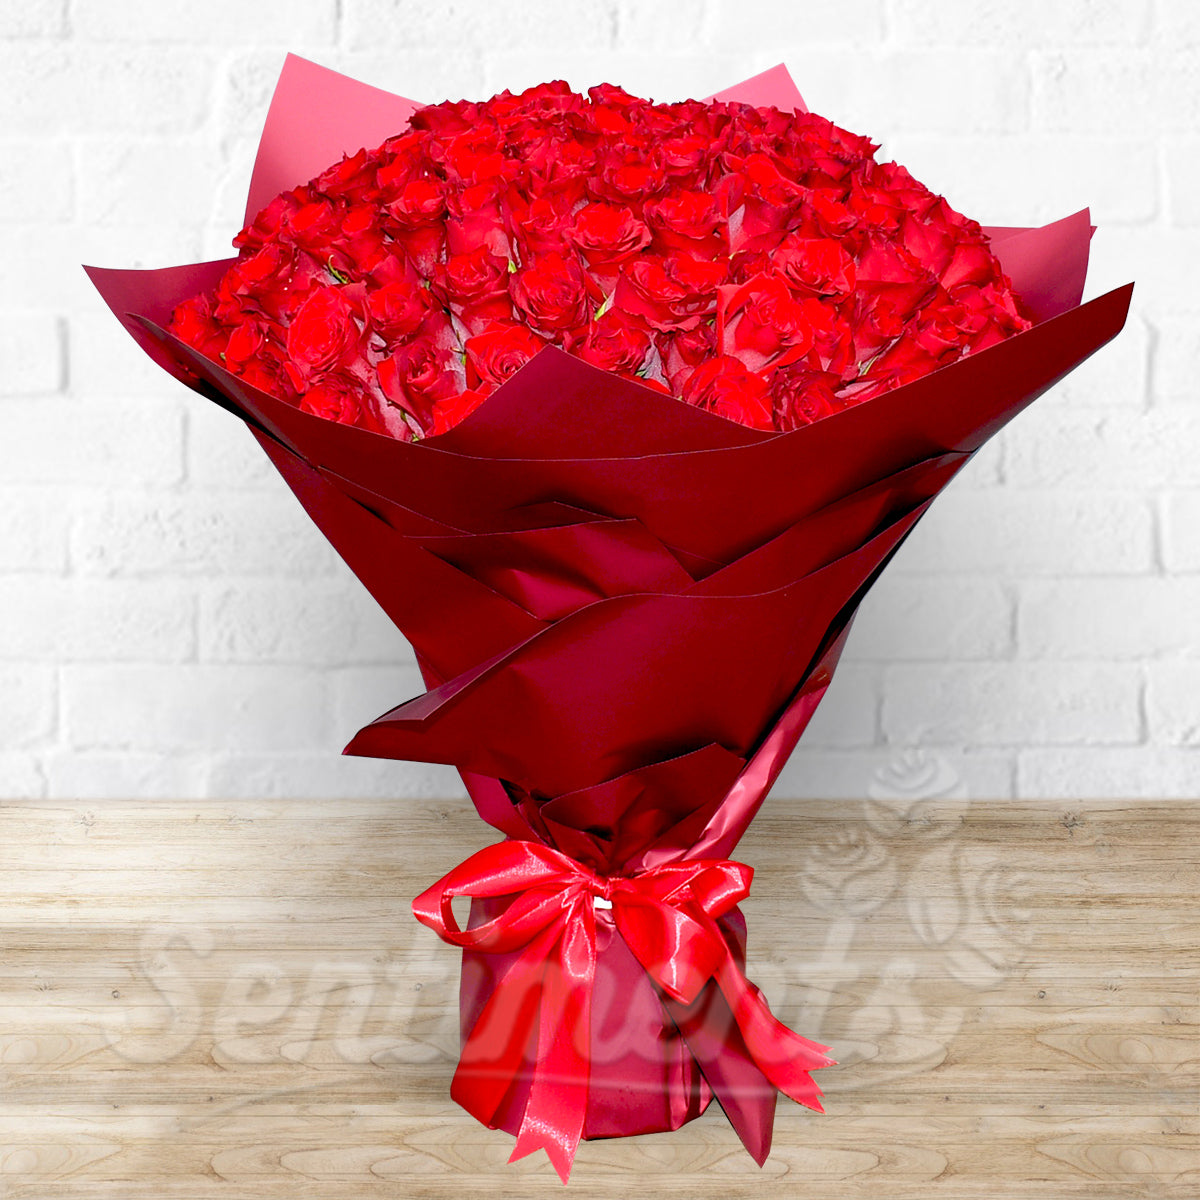 100 Red Roses Hand Bouquet